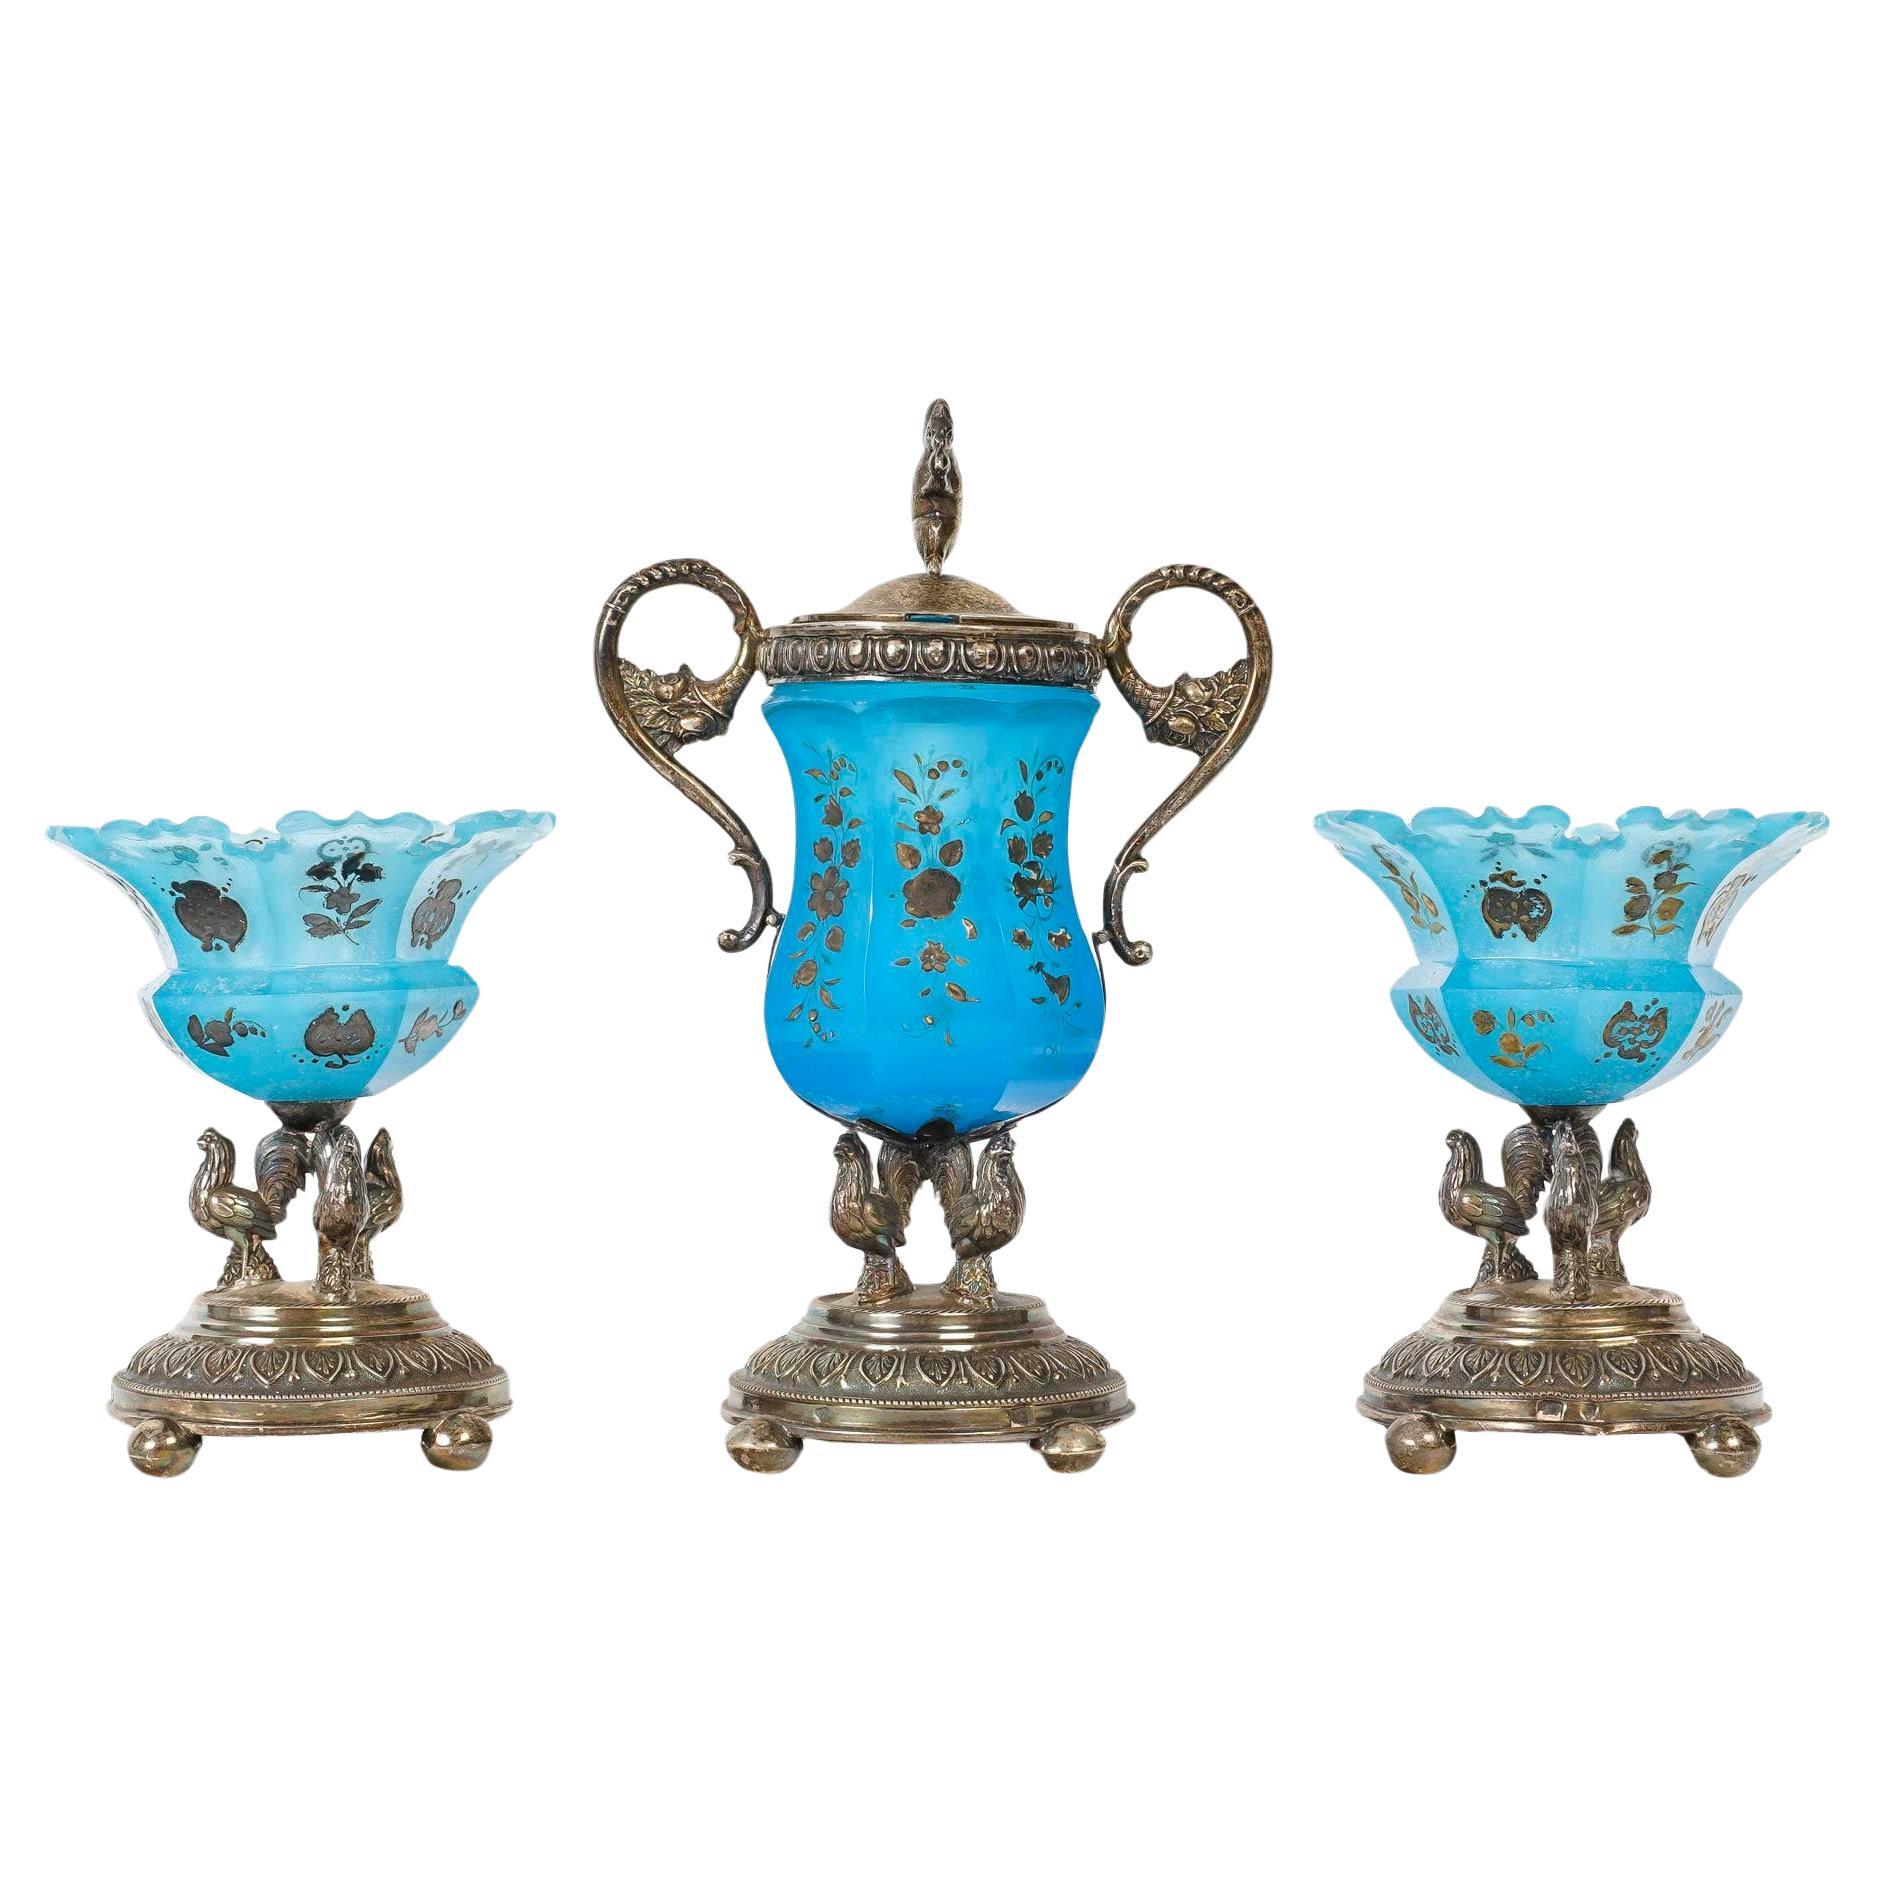 Jam Set in Blue Enamelled Opaline and Silver Plated Metal, 19th Century. For Sale